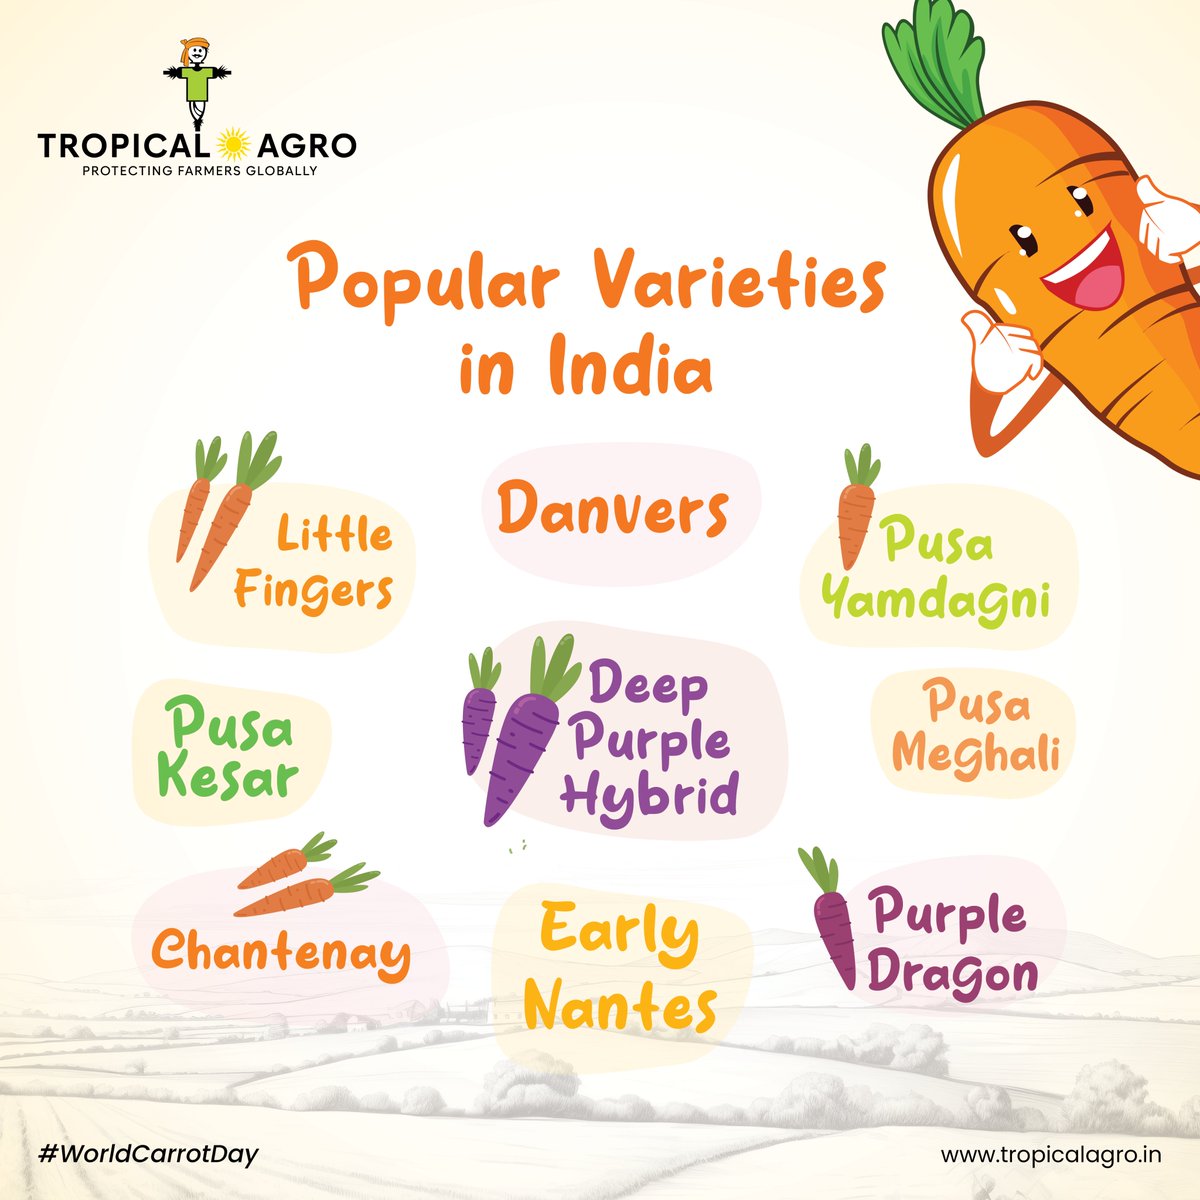 Did you know these facts about carrots ??🥕🥕

Like❤️ if you already knew about this !

#HappyInternationalCarrotDay
#WorldCarrotDay #Carrots #DidYouKnow #Facts #Vegetable #varietiesofcarrot #carrots
#internationalcarrotday🥕 #TropicalAgro